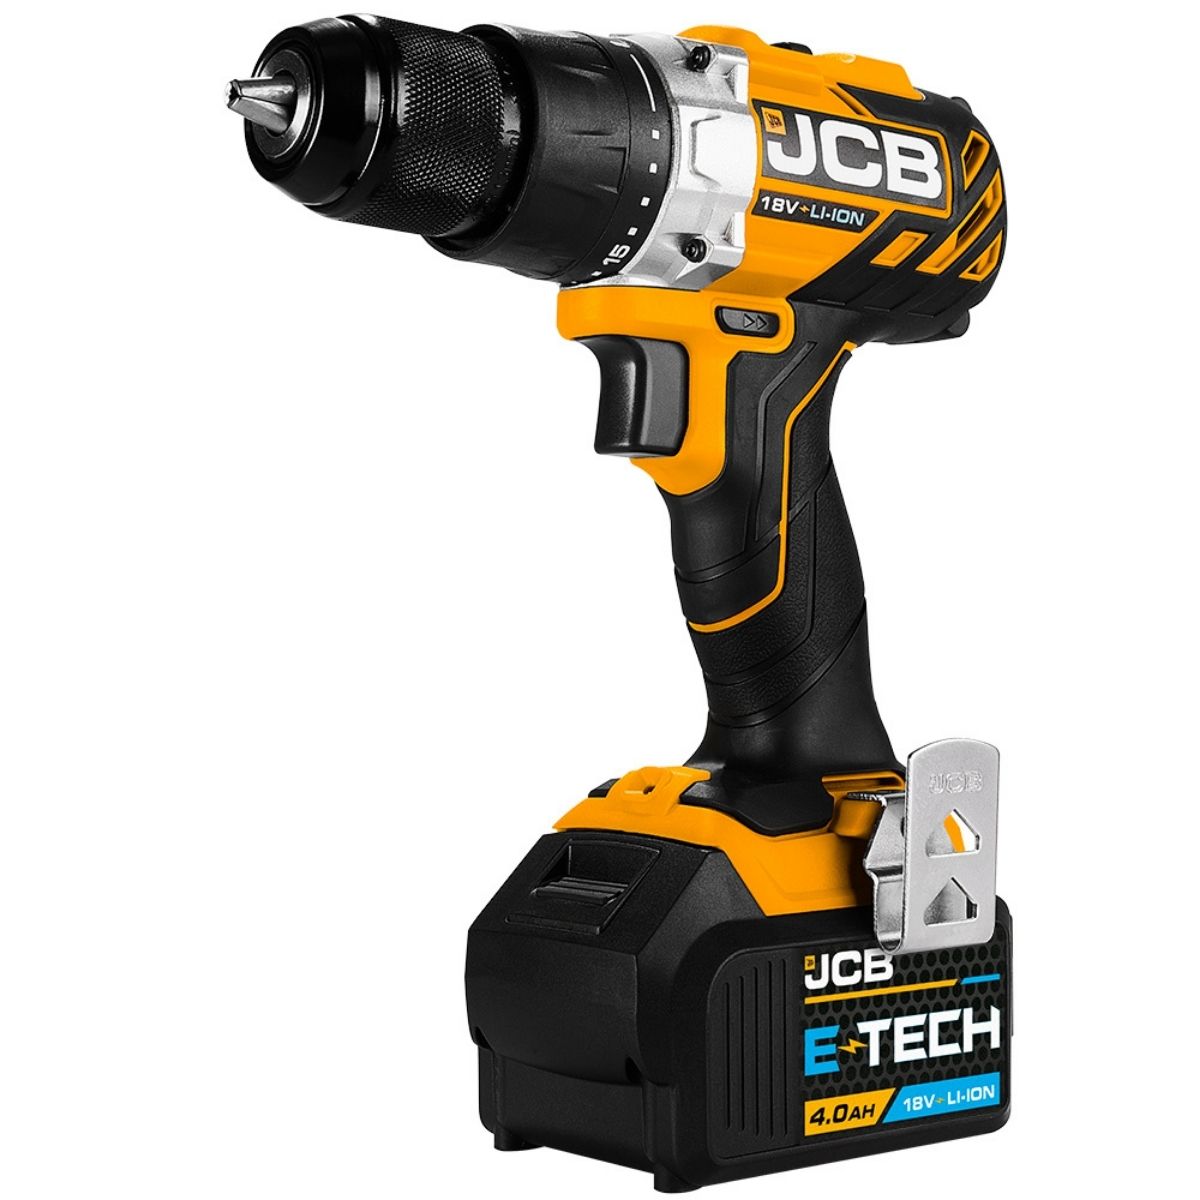 JCB 21-18BLDD-4X 18V Brushless Drill Driver with 1x4.0Ah Battery & Charger